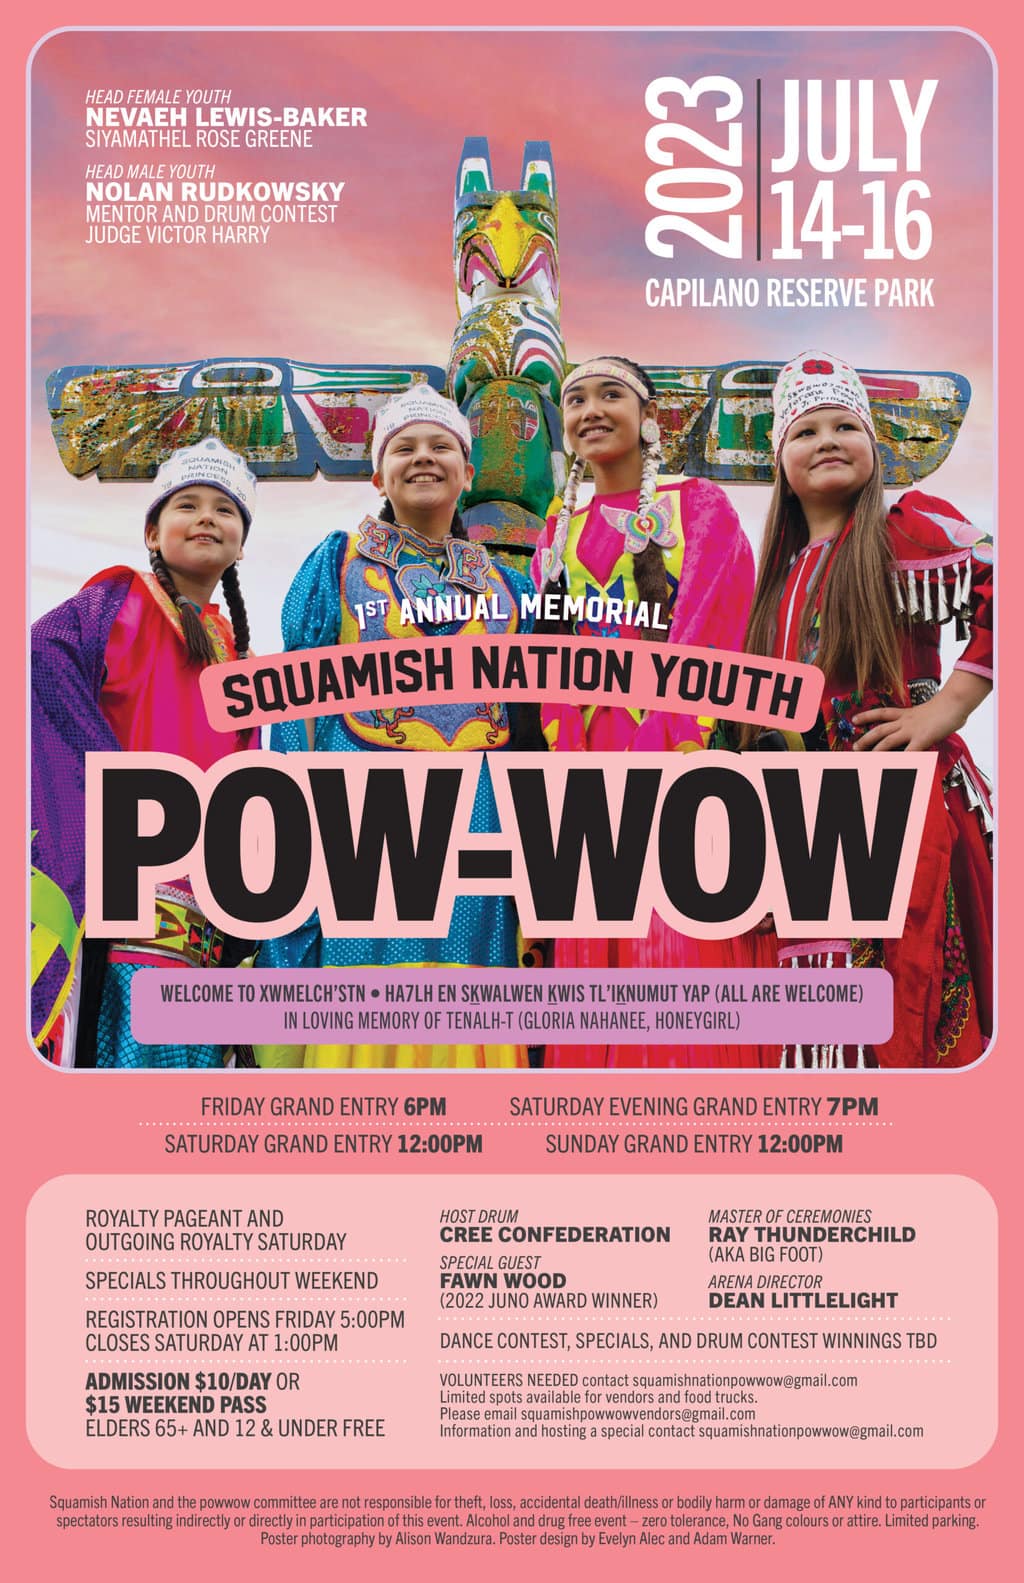 1st Annual Memorial Squamish Nation Youth Pow Wow 2023